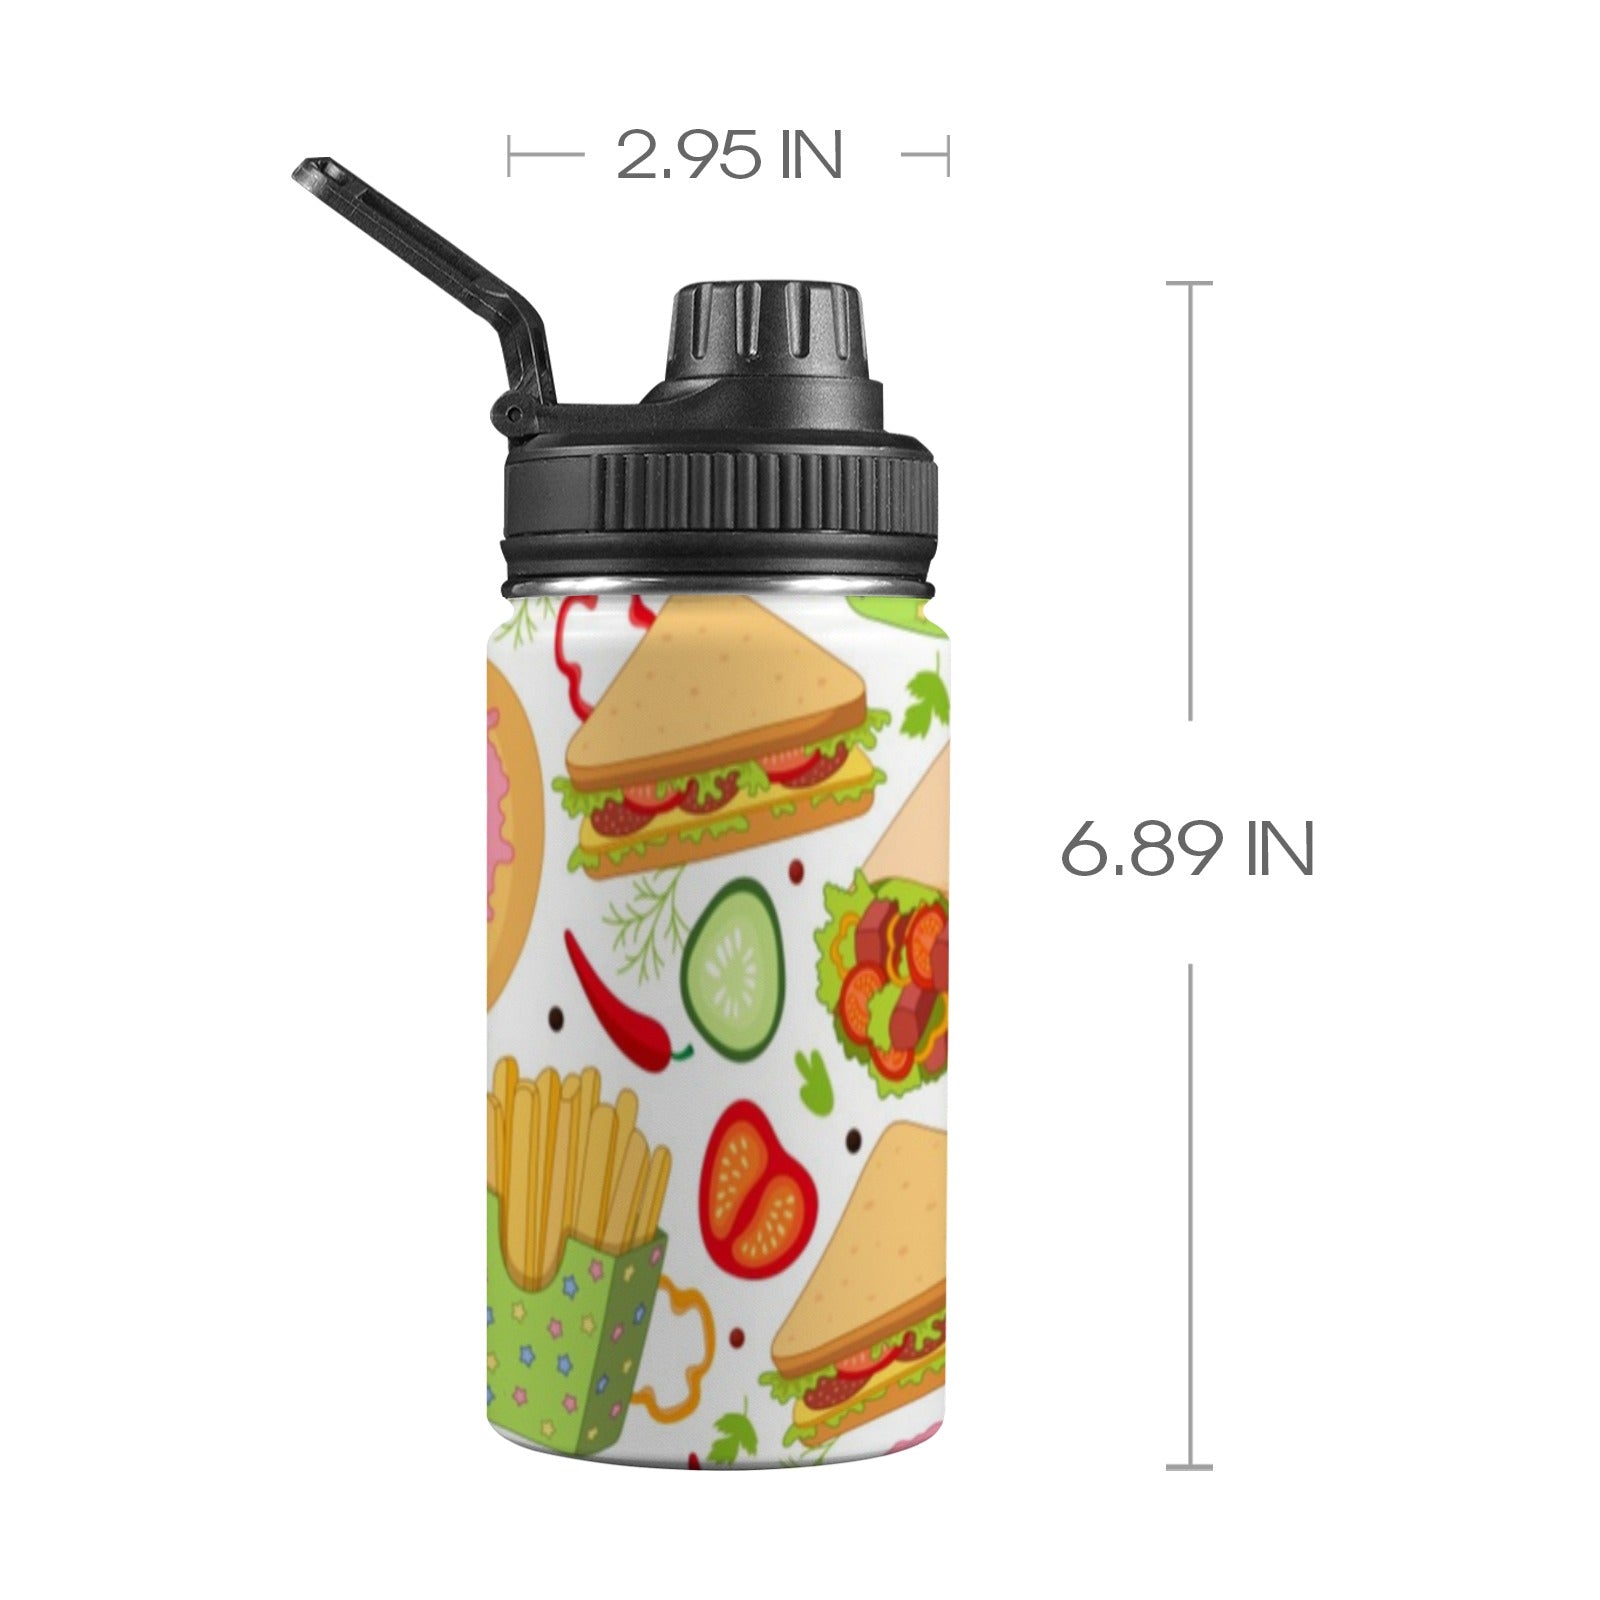 Snack Time - Kids Water Bottle with Chug Lid (12 oz) Kids Water Bottle with Chug Lid